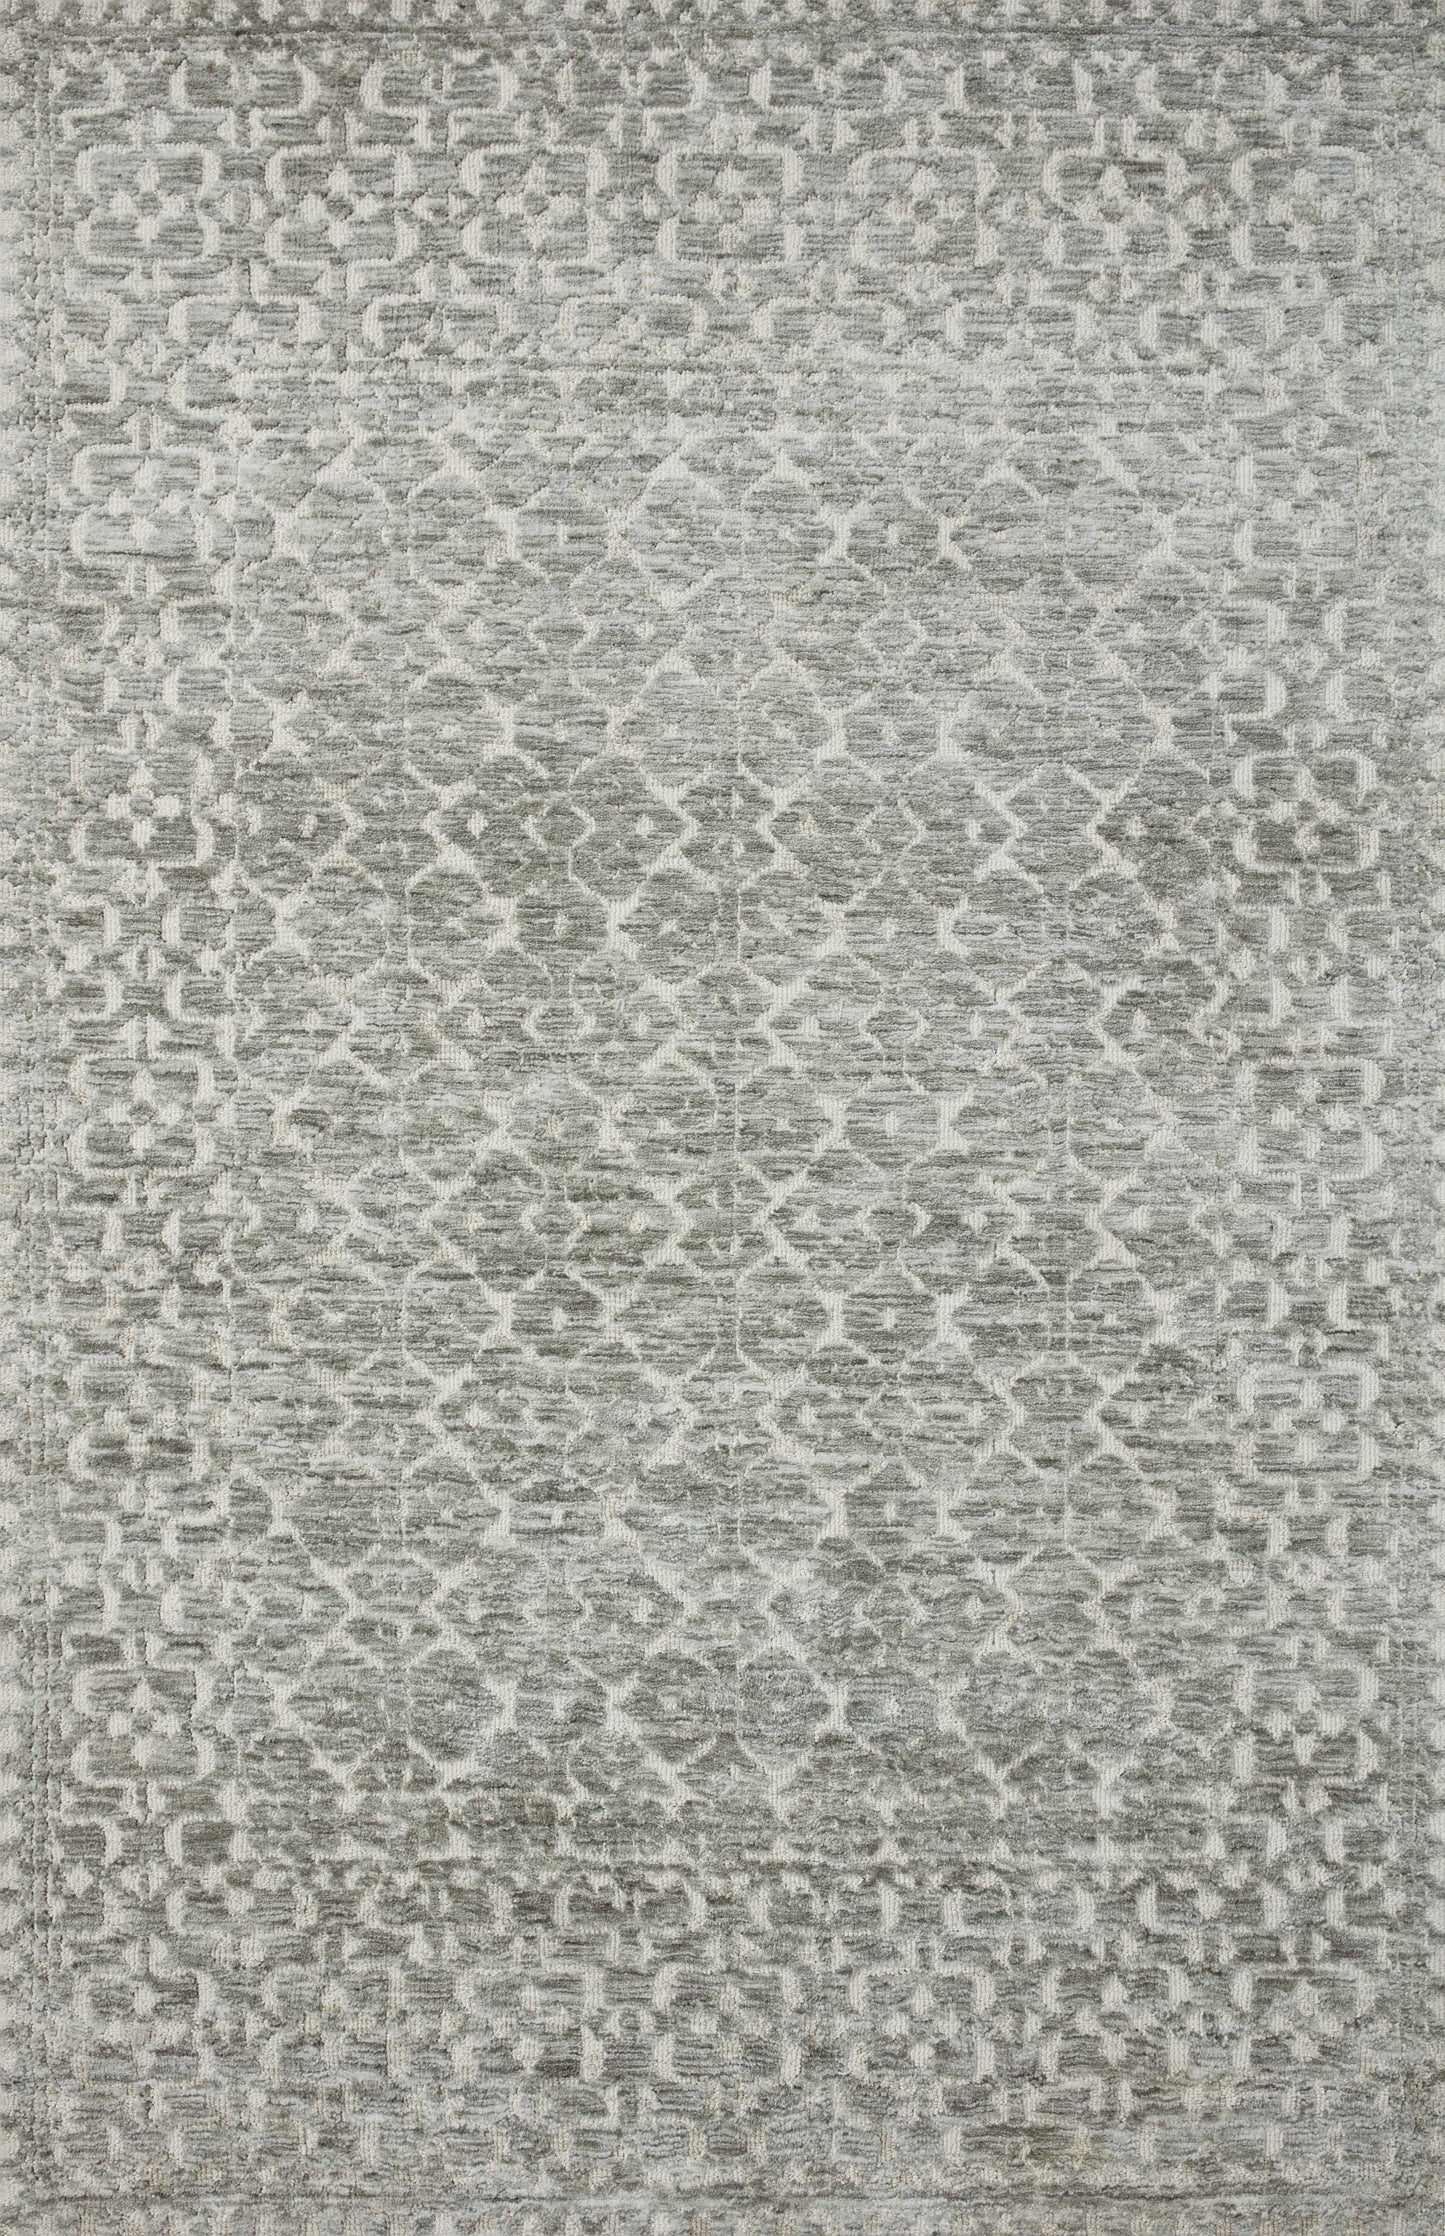 Yeshaia ED Synthetic Blend Indoor Area Rug from Justina Blakeney x Loloi